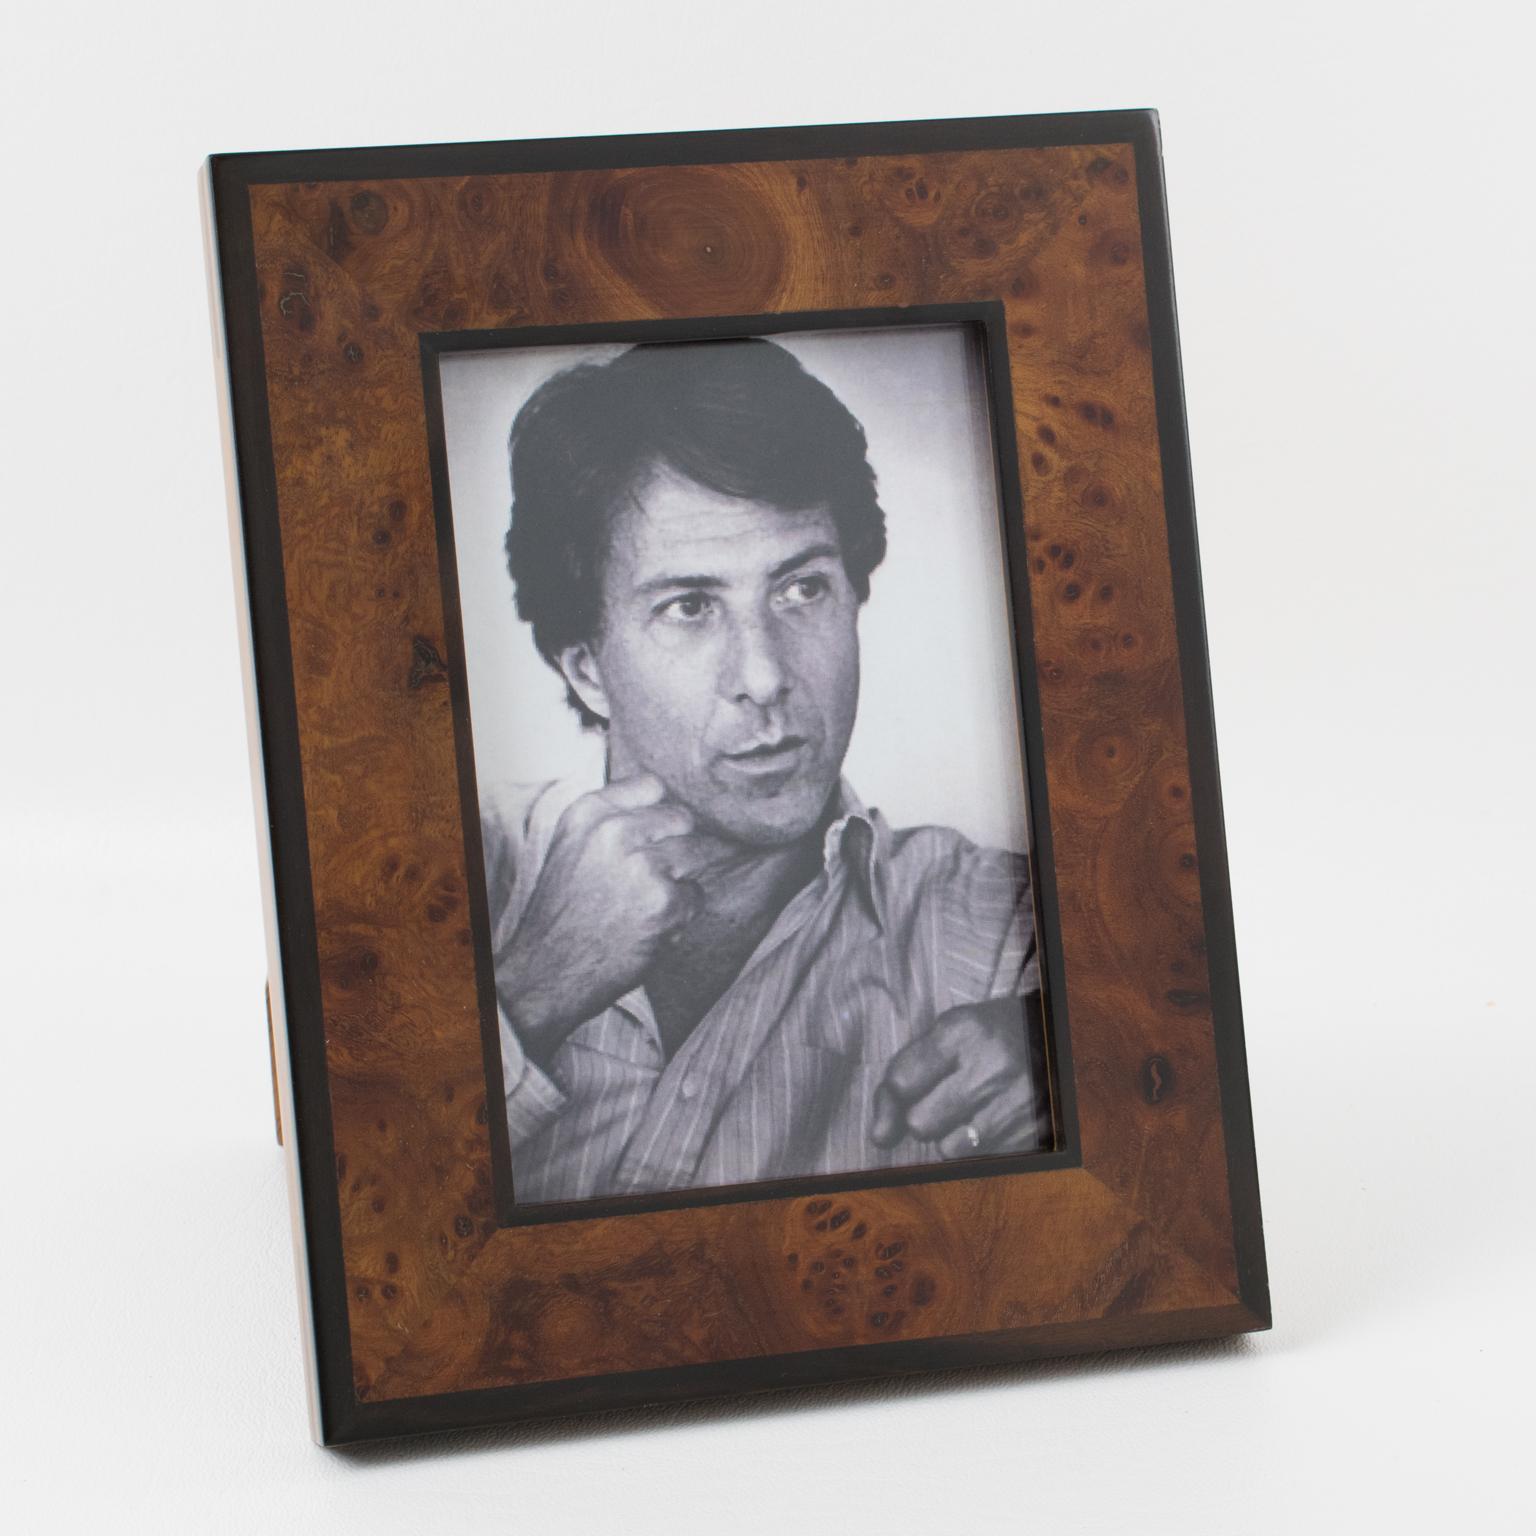 Superb picture photo frame by Italian designer Gucci. Timeless and elegant burl wood marquetry. Back and easel in wood with gilt metal hardware and Gucci company logo. 
Measurements:
Overall: 5.50 in. wide (14 cm) x 7.07 in. high (18 cm).
Opening